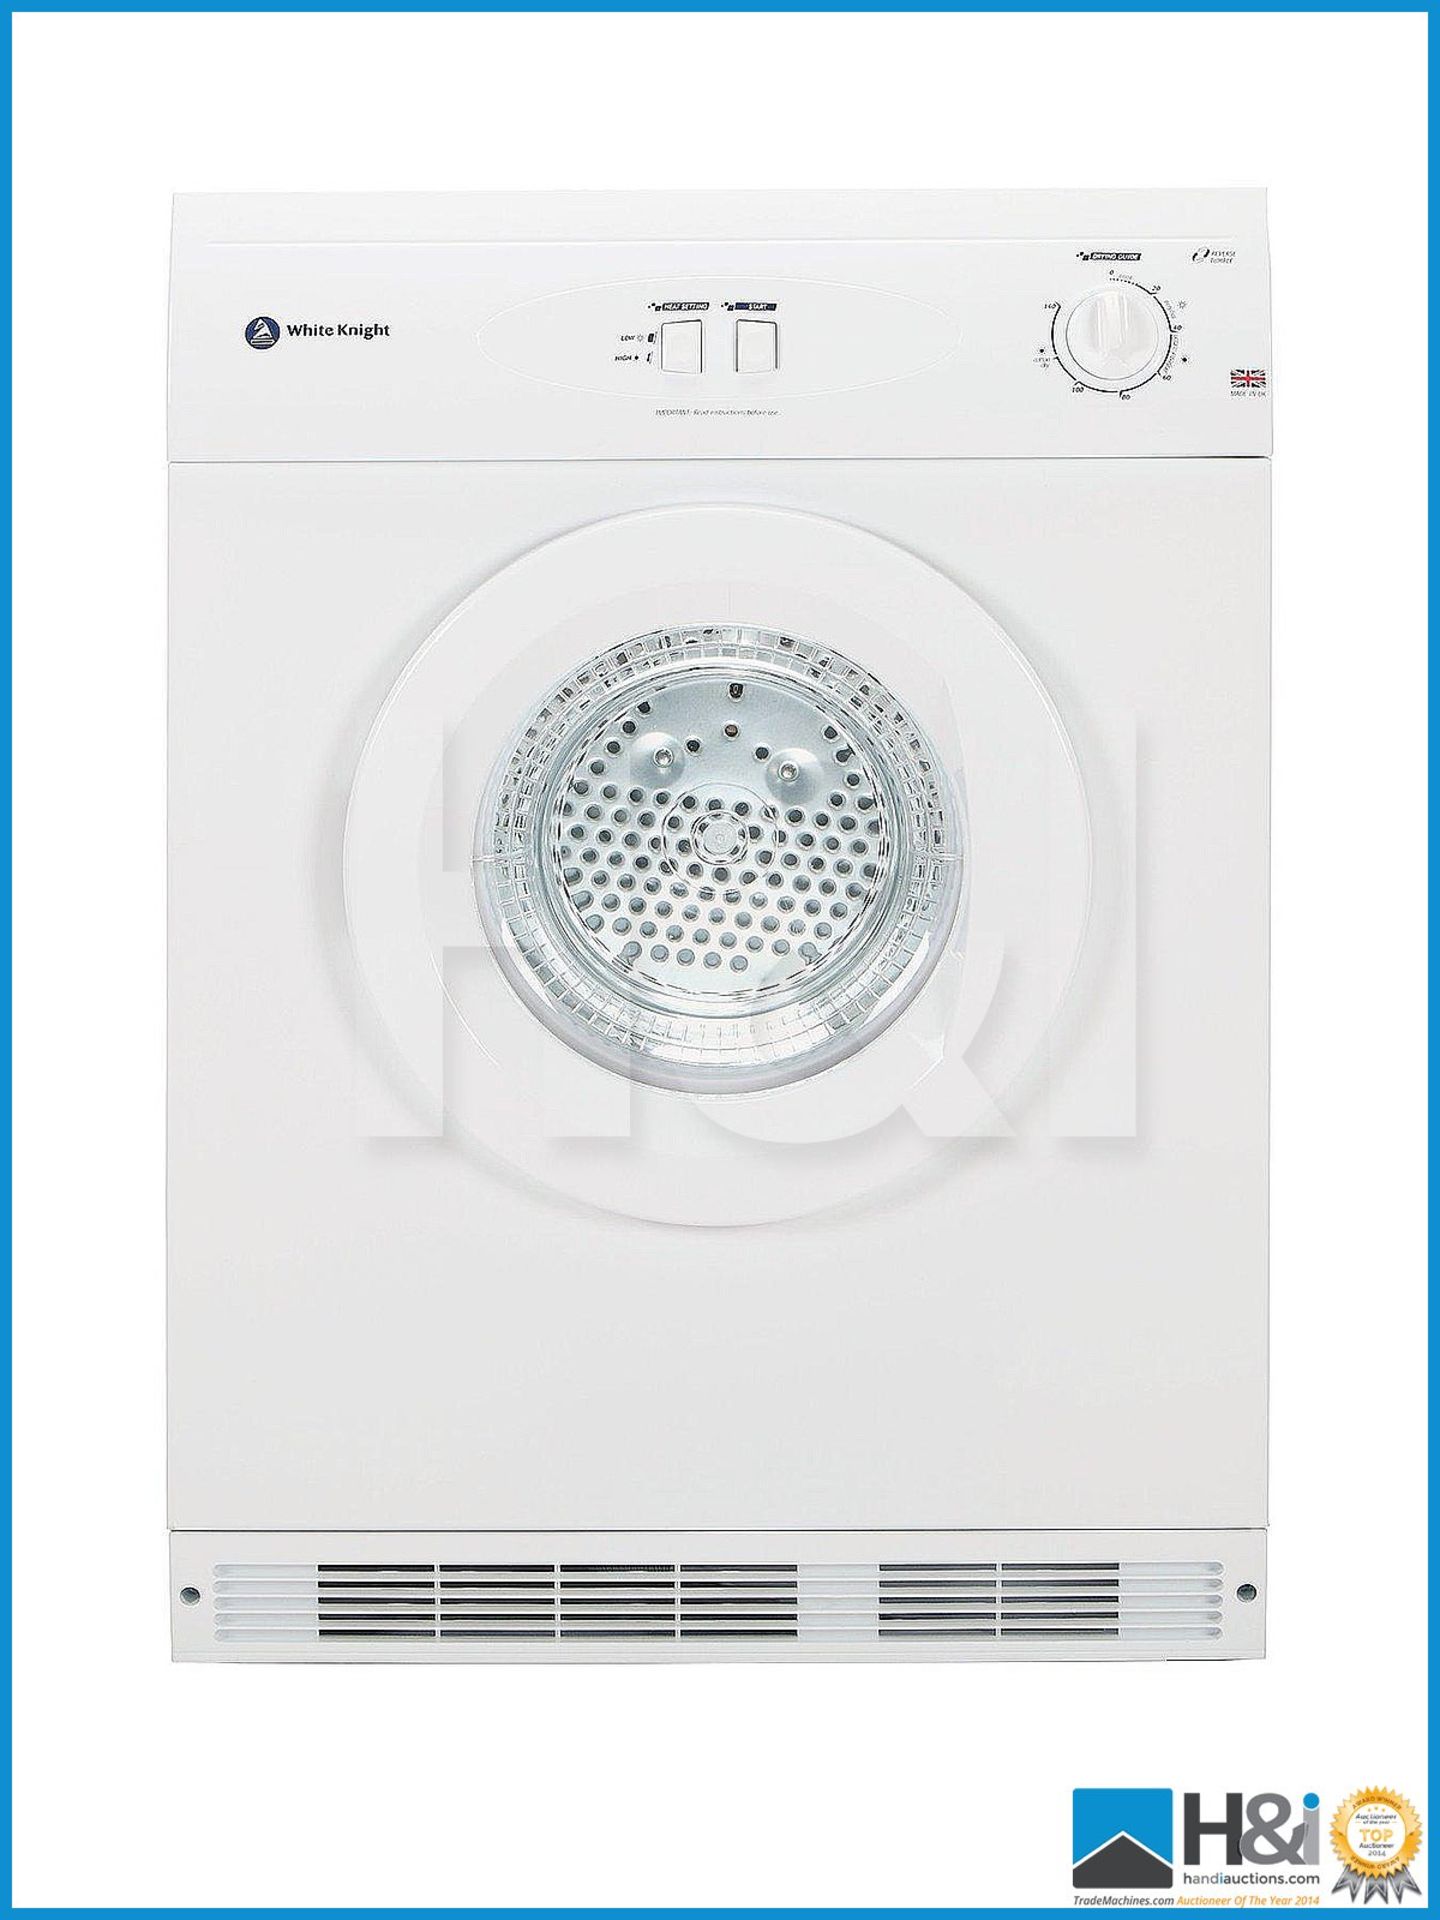 EX-DISPLAY UNTESTED WHITE KNIGHT C44A7W 7KG LOAD TUMBLE DRYER [WHITE] 0 x 60 x 0cm RRP GBP 287